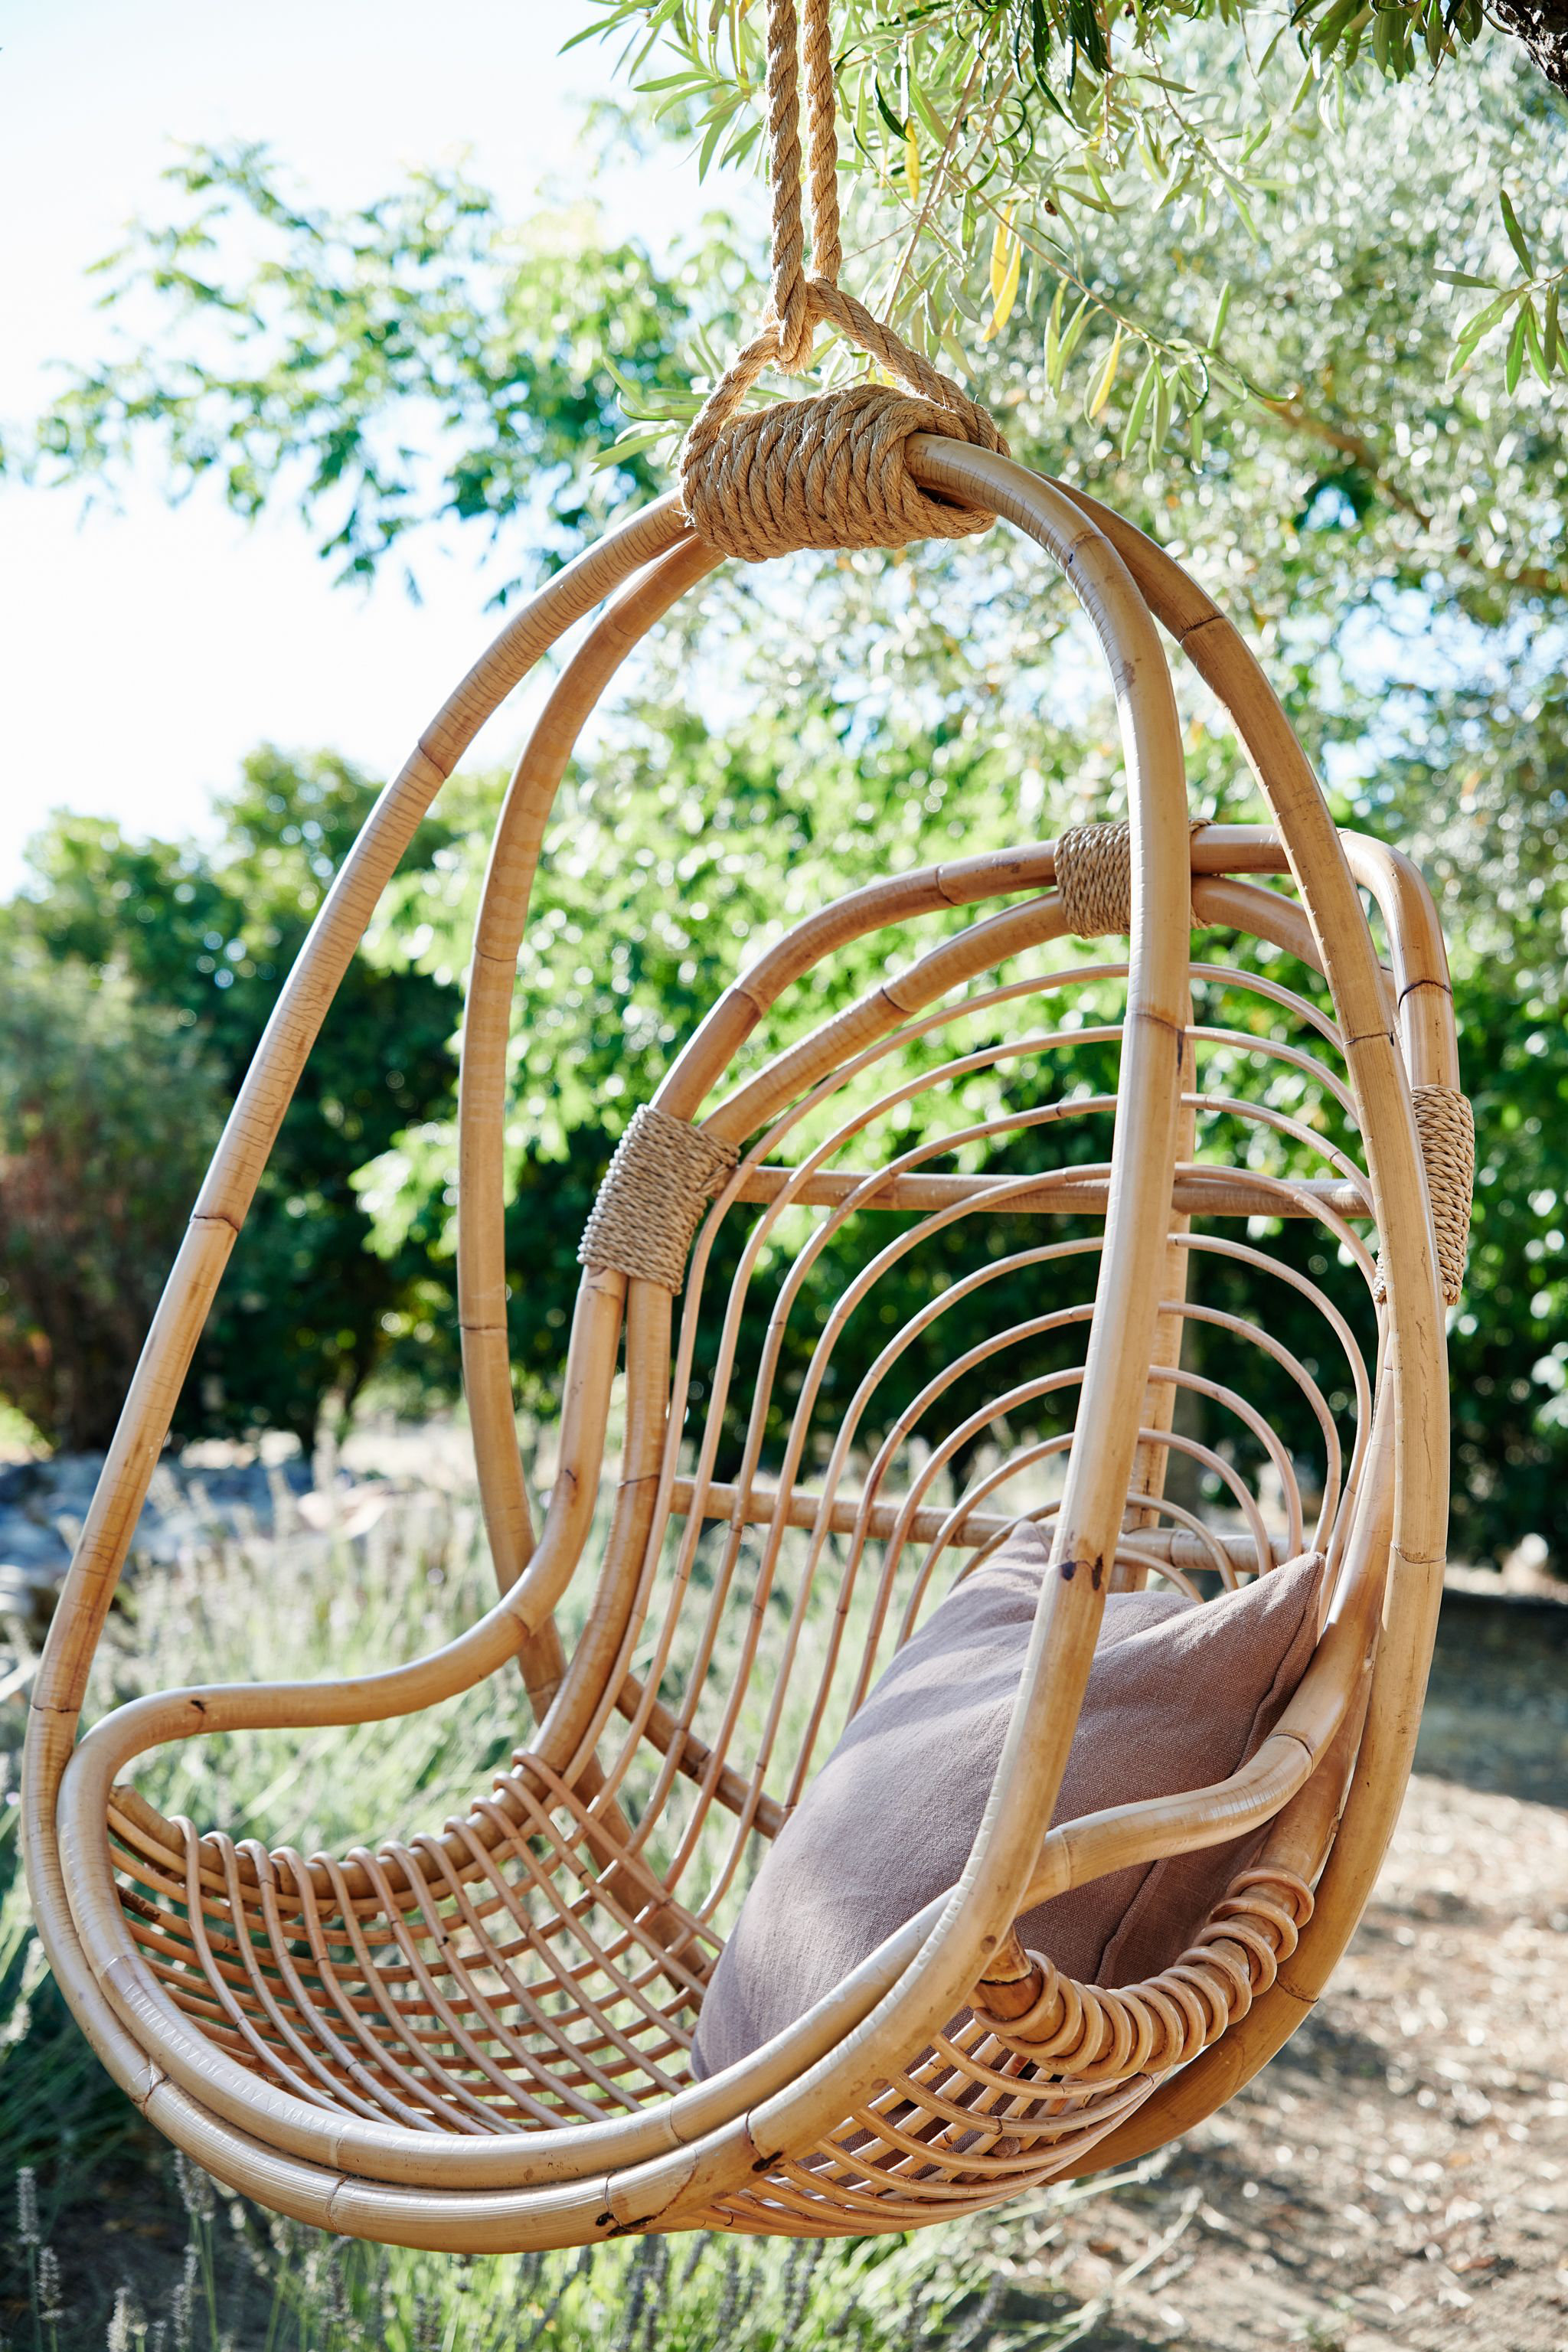 Hanging Swing Chair - patio rattan swing chair by Patricia Urquiola